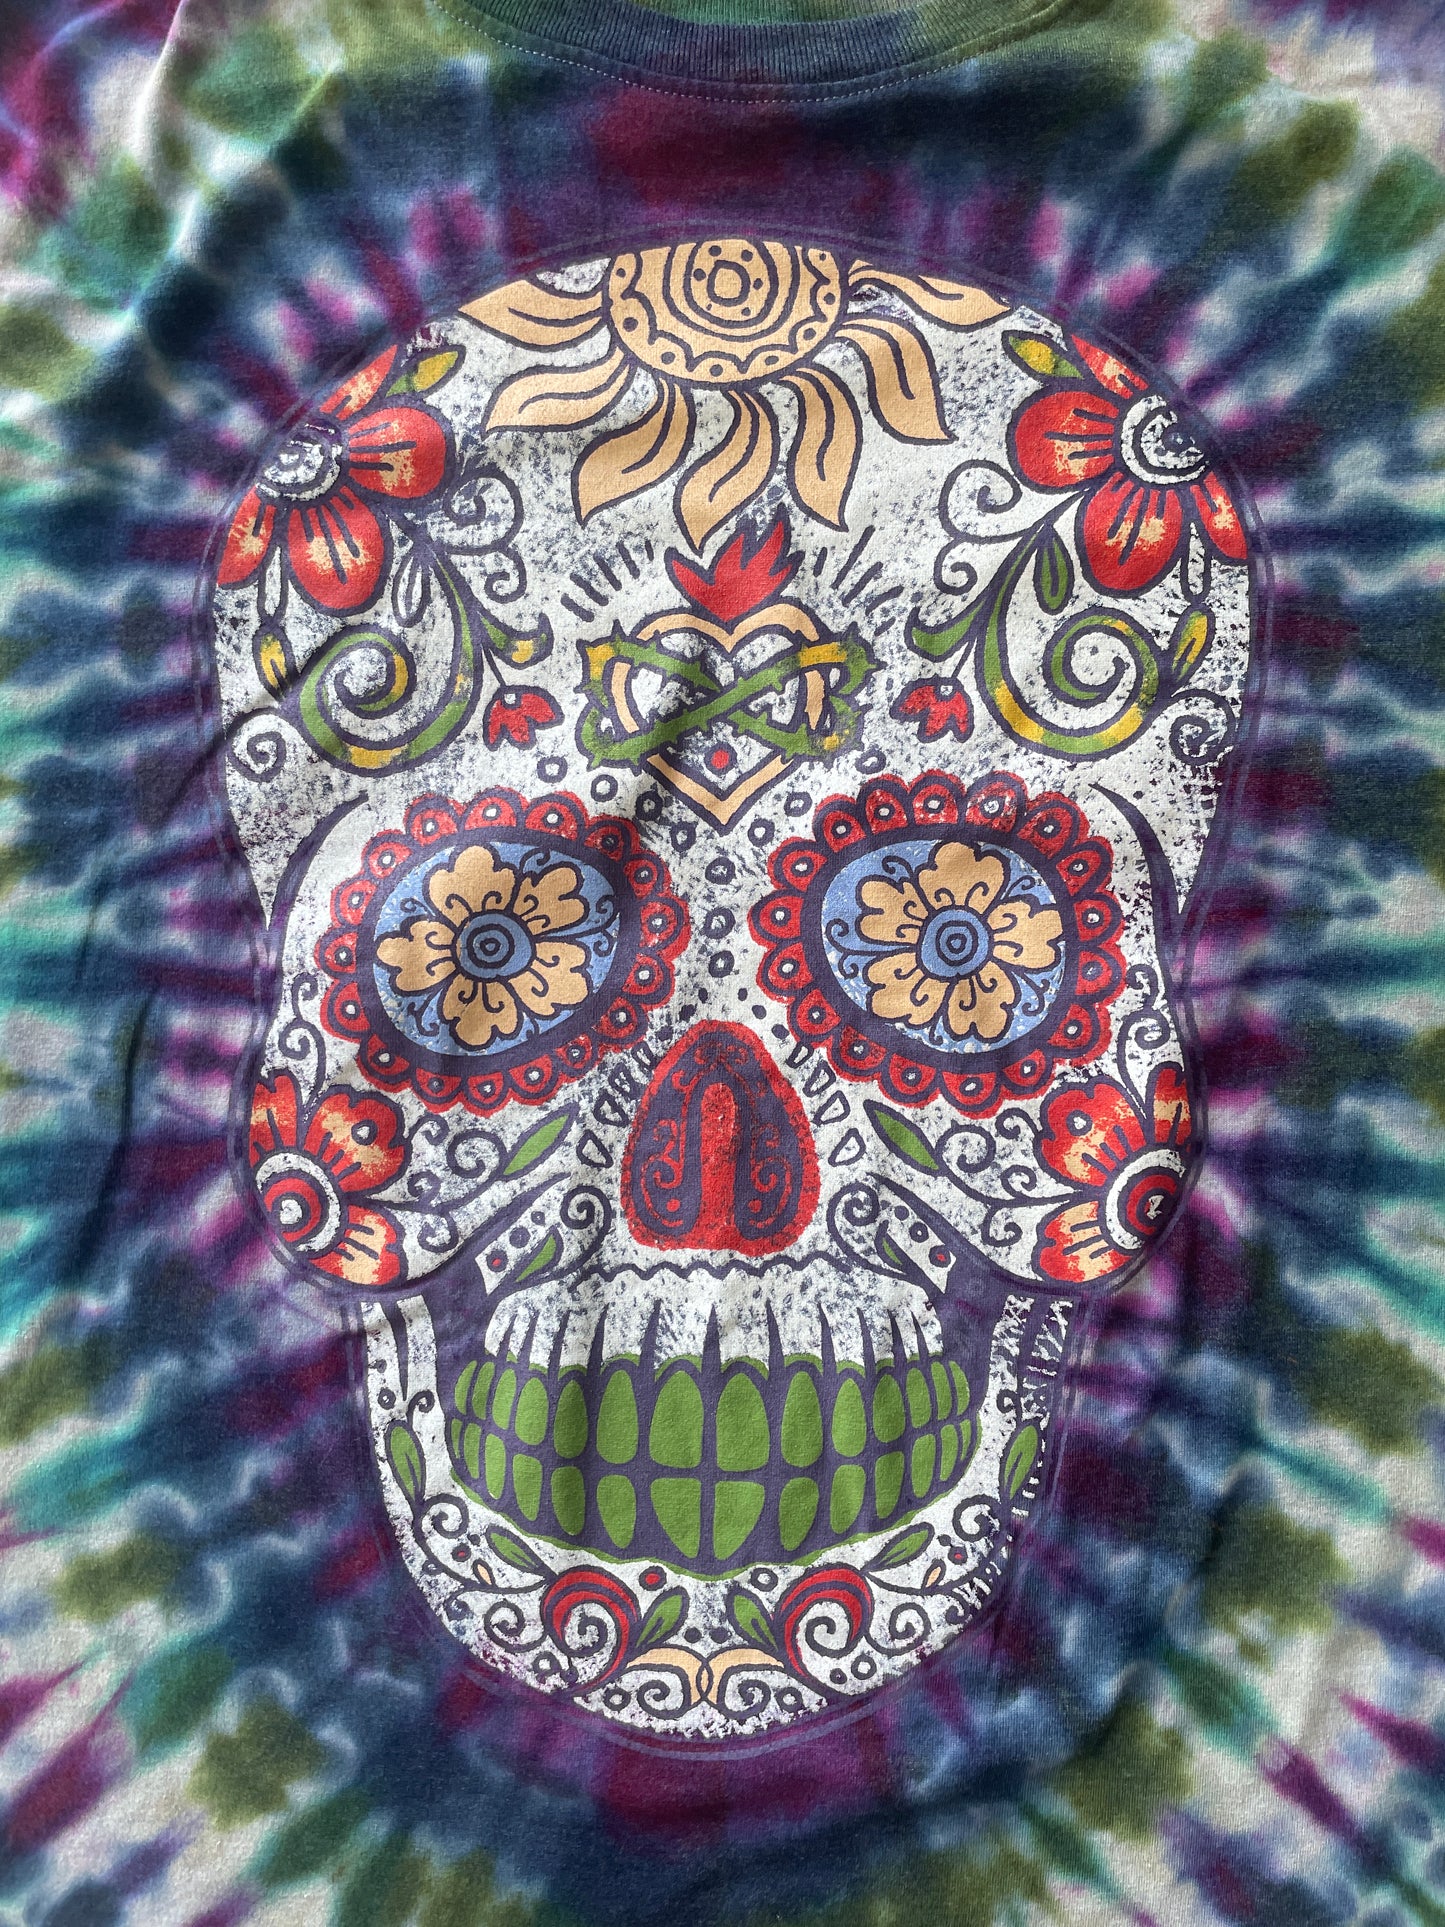 M/L Men’s Sugar Skull Reverse Tie Dye T-Shirt | One-Of-a-Kind Purple and Blue Pleated Short Sleeve